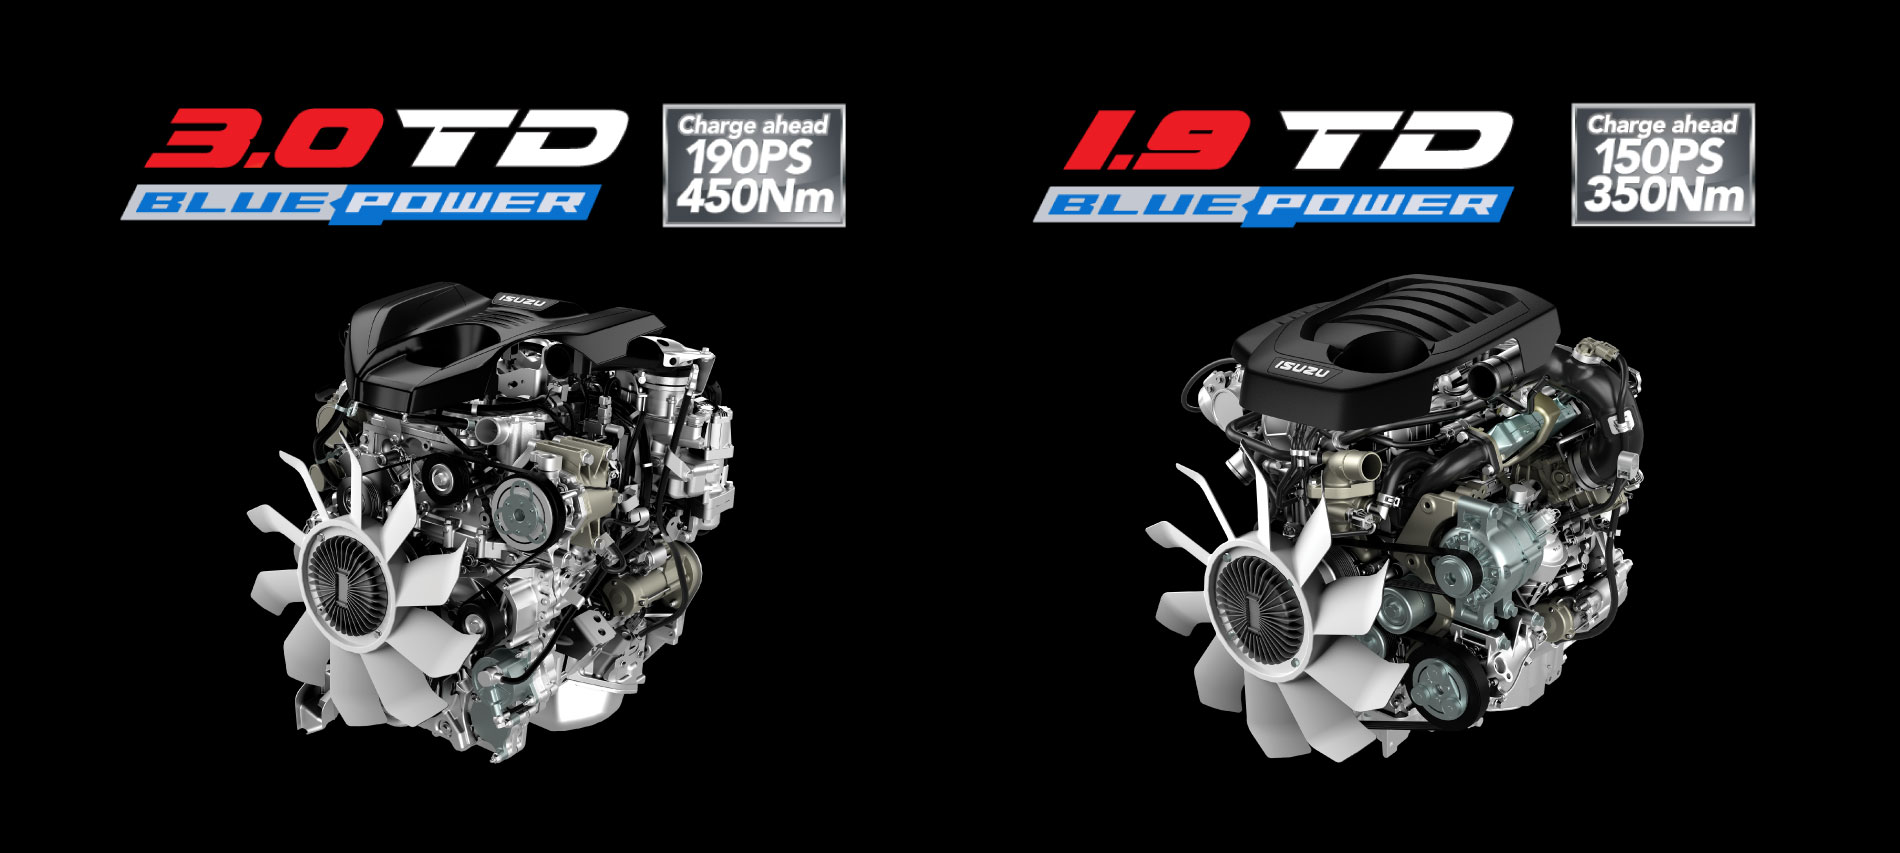 3.0L AND 1.9L BLUE POWER ENGINE